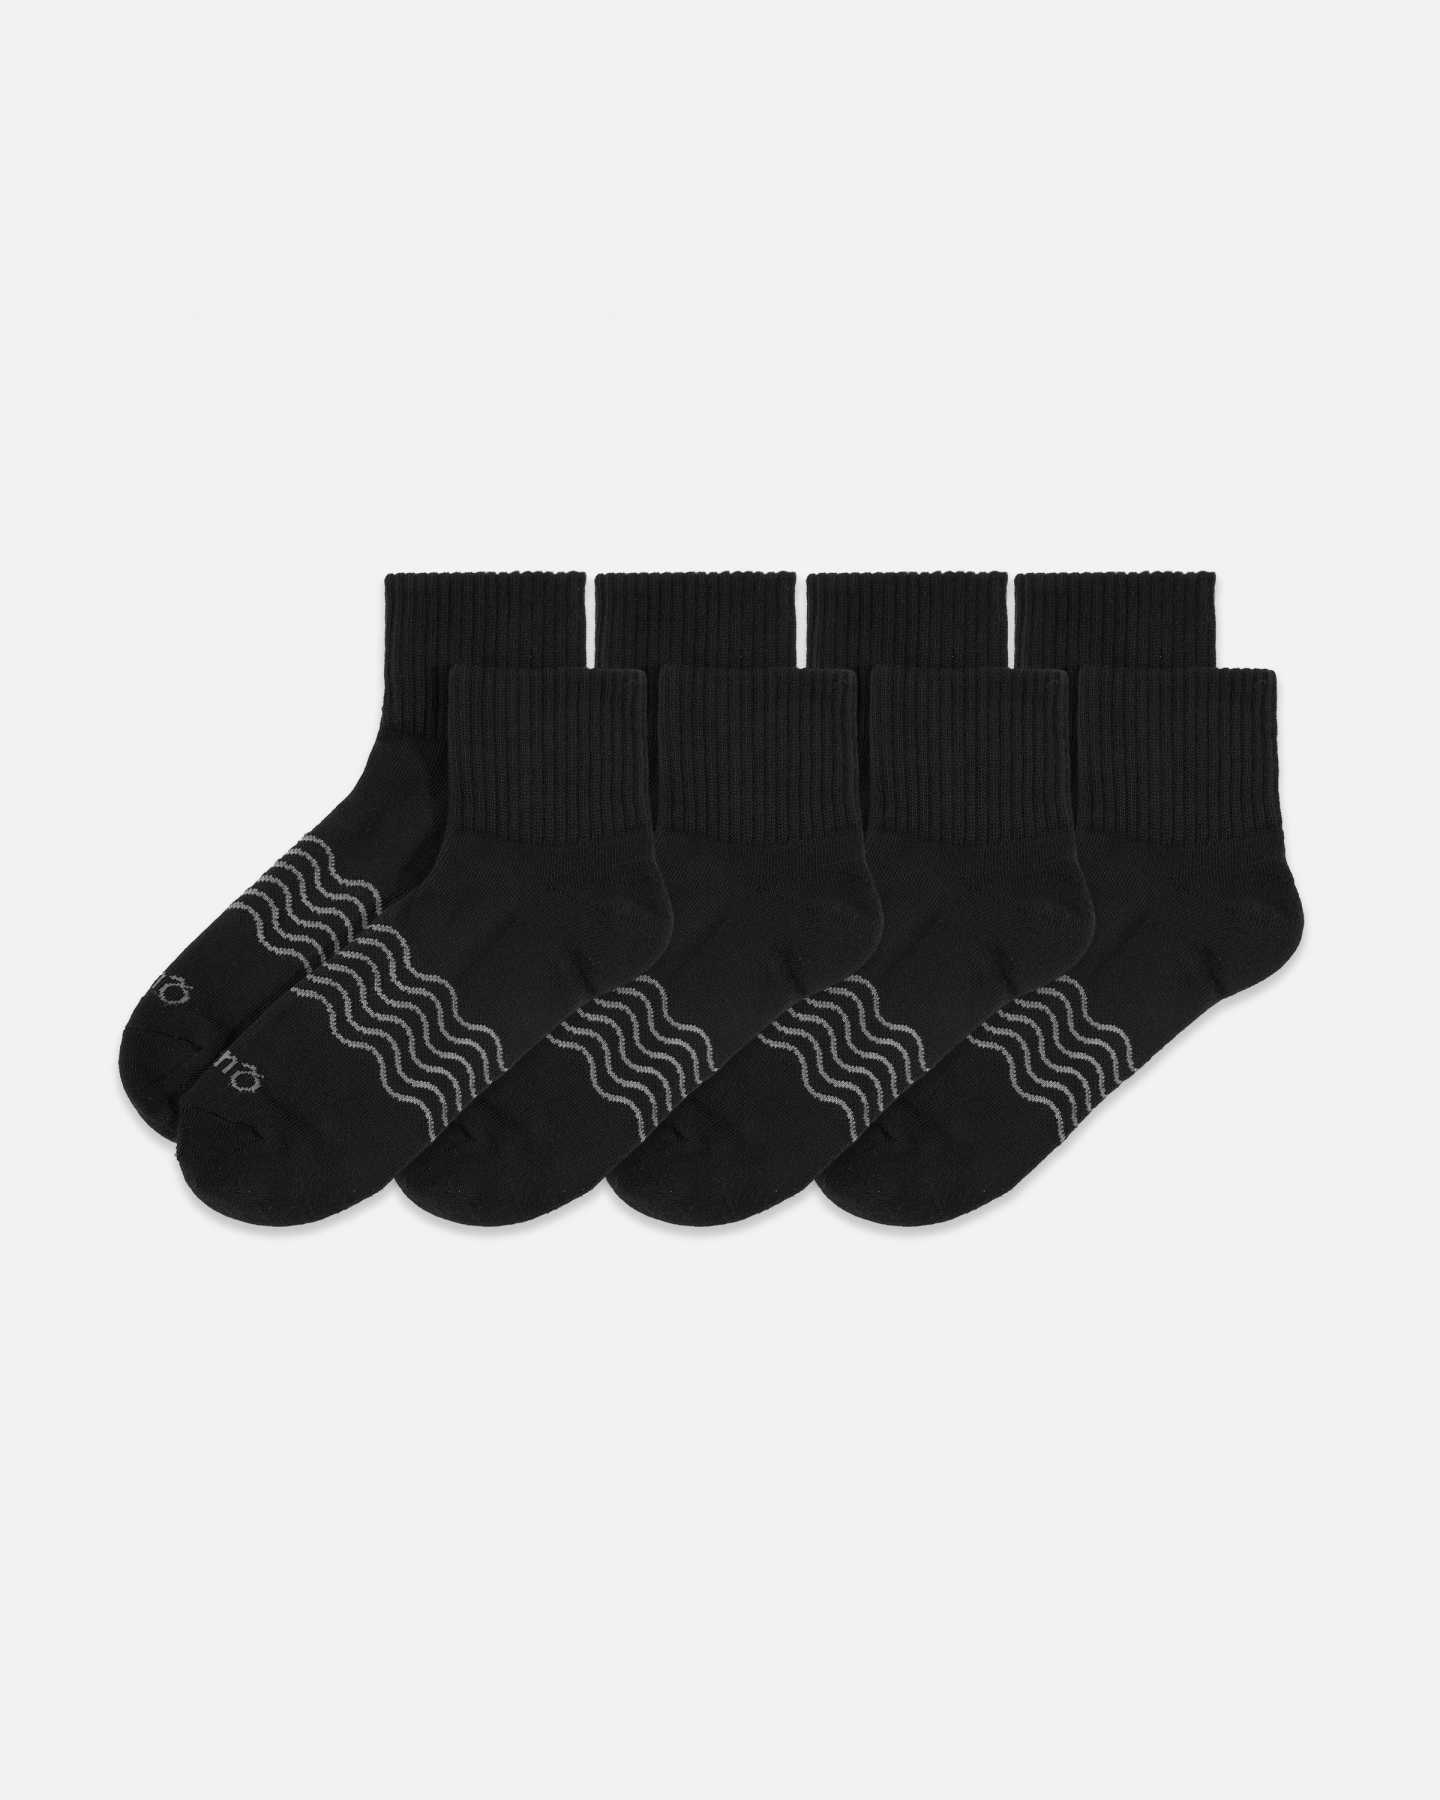 You May Also Like - Organic Cotton Quarter Socks (4-Pack) - Black